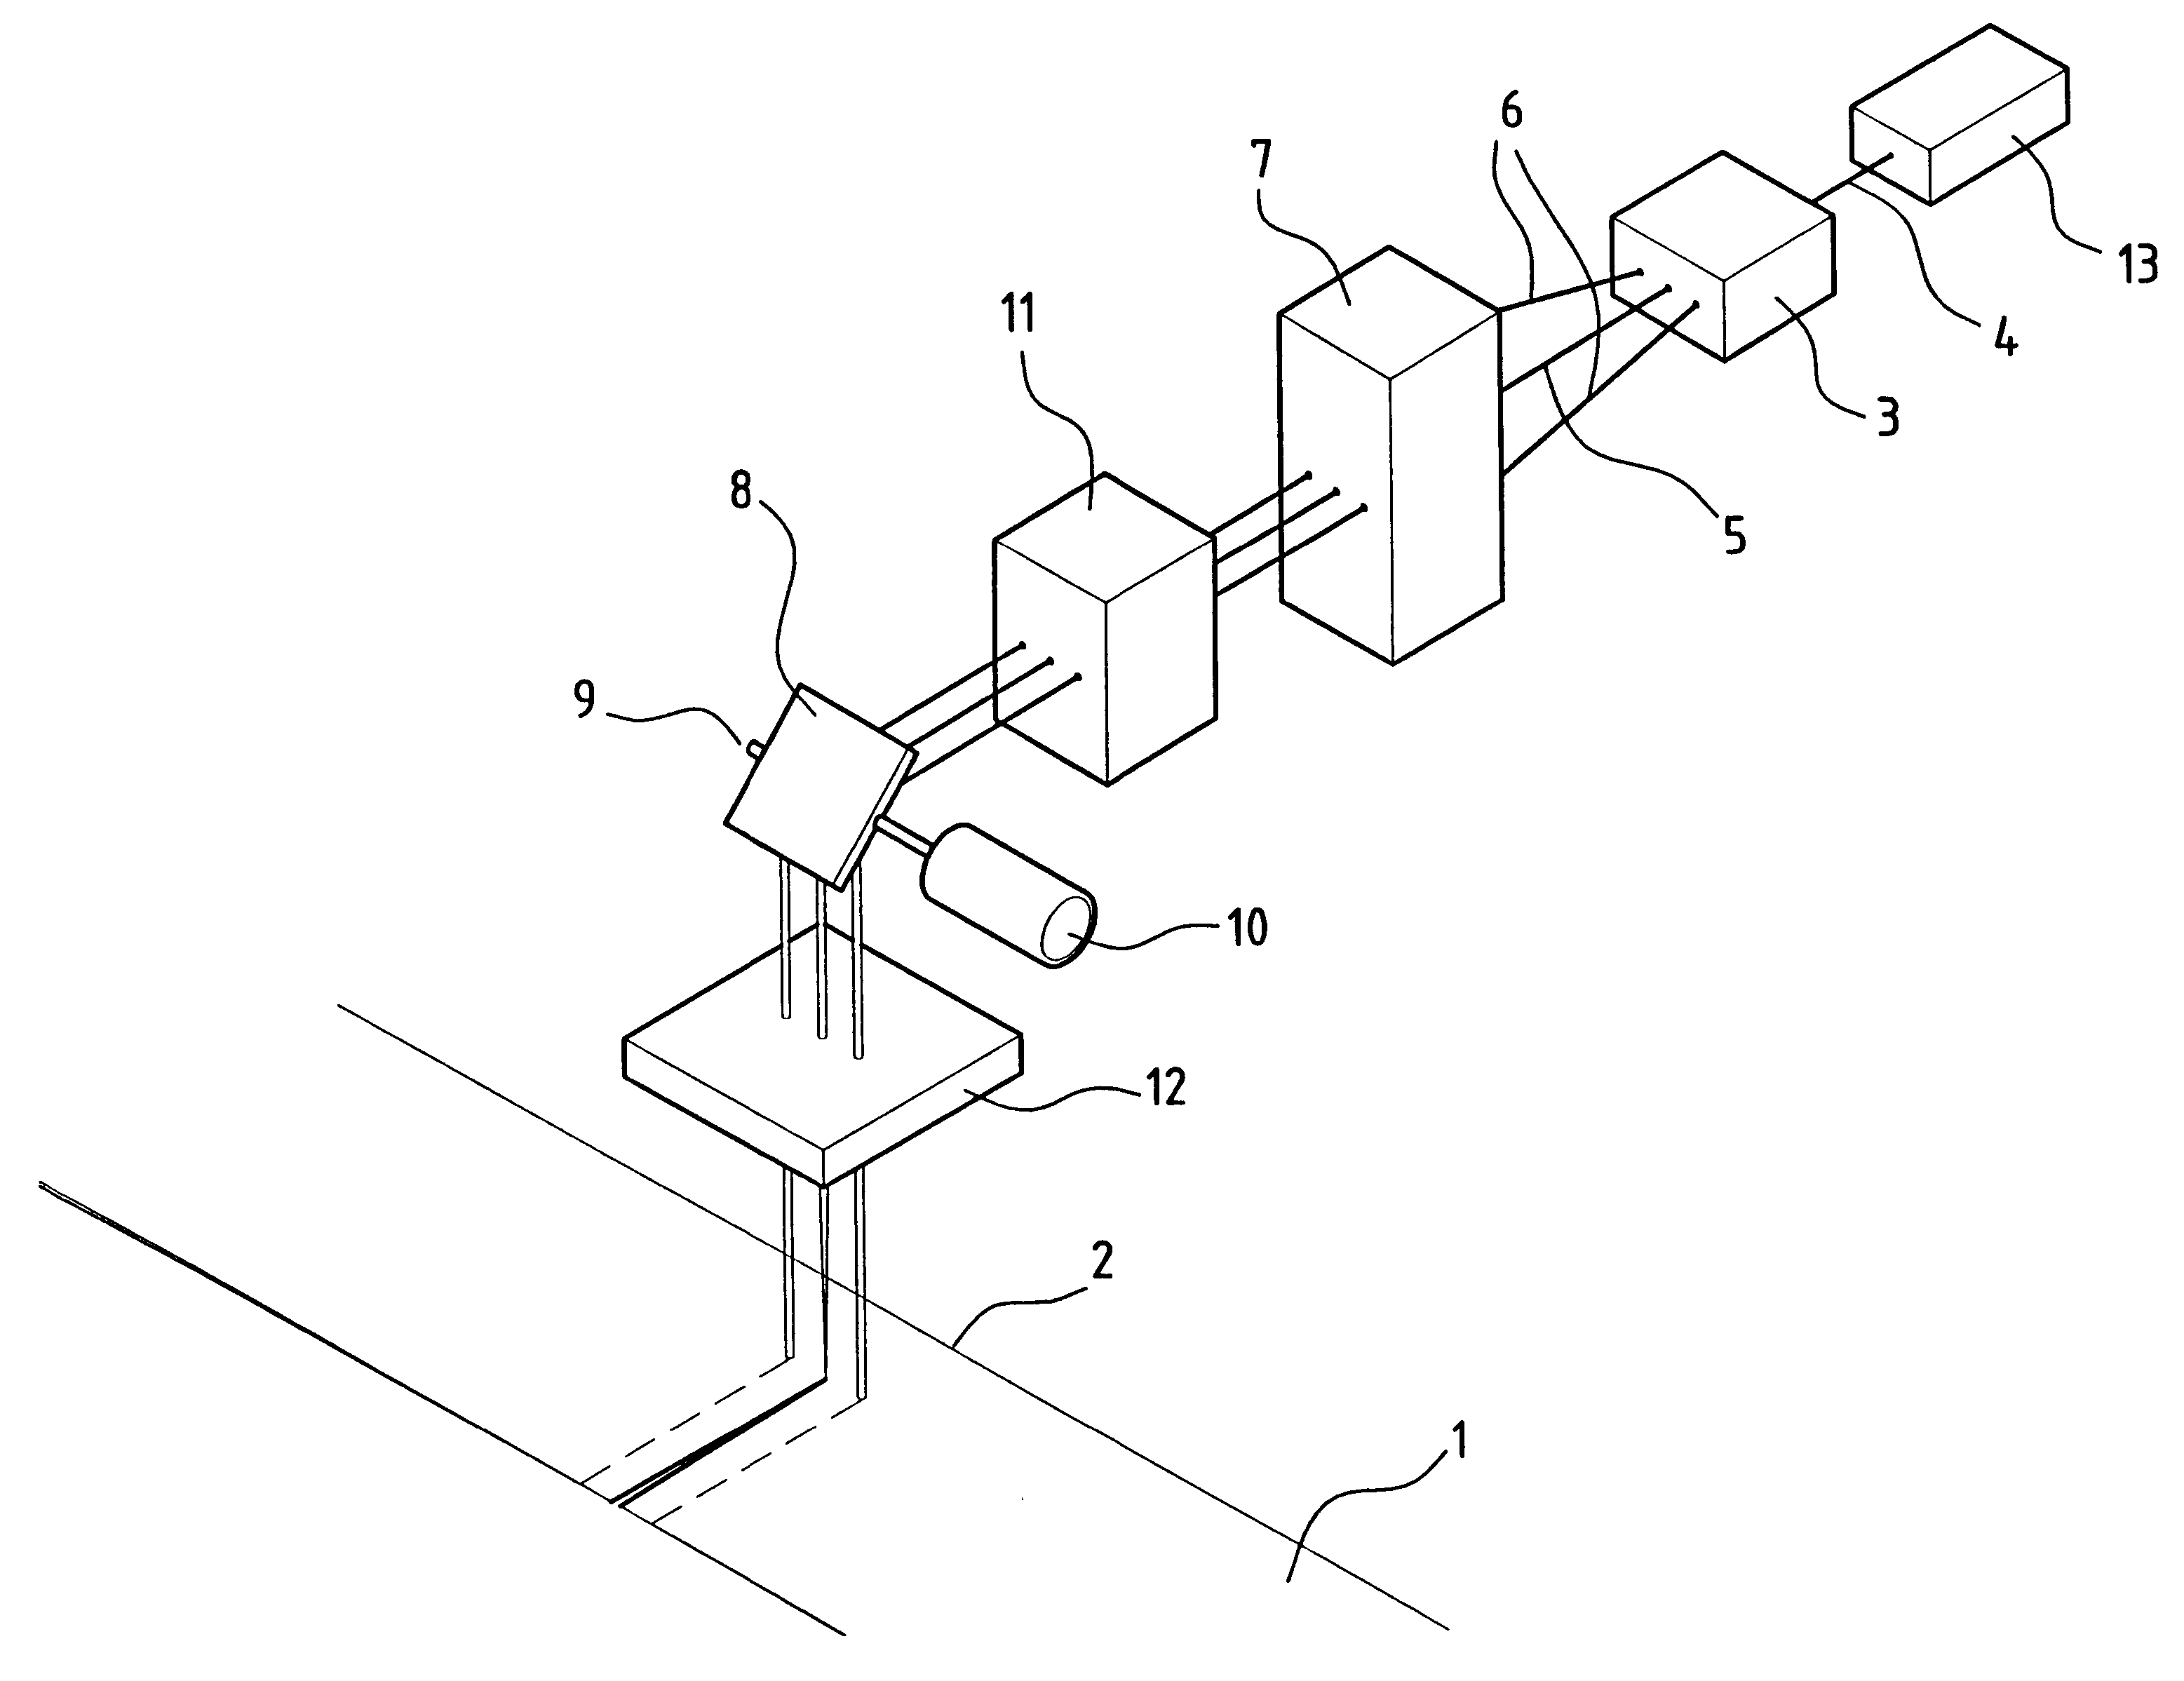 Apparatus for cutting and/or welding flexible packaging